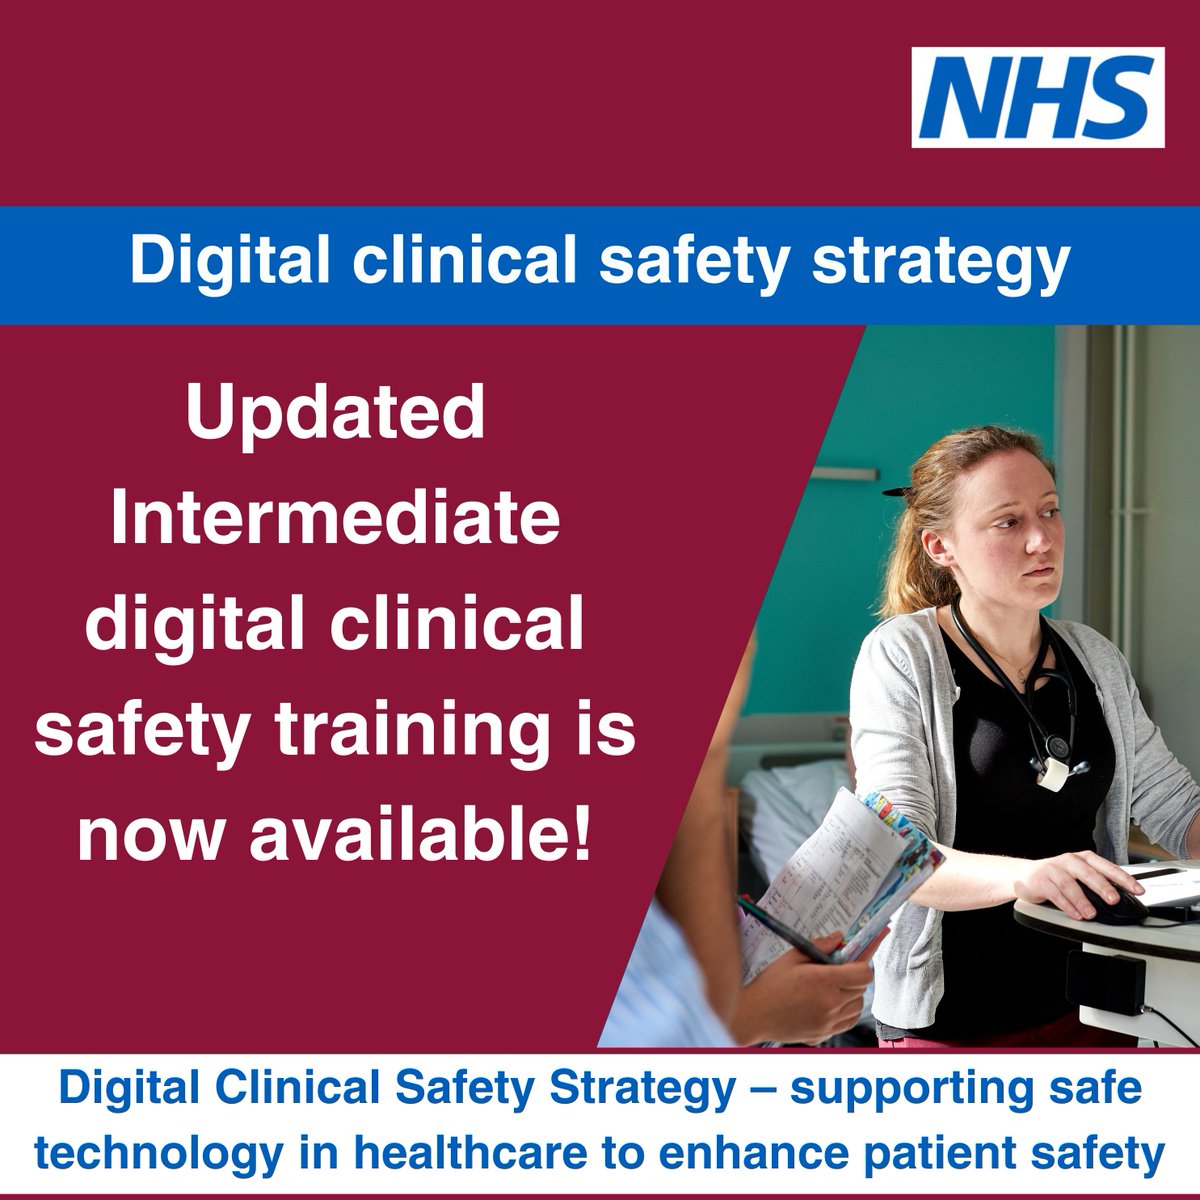 Updated intermediate training is now available for those working in digital clinical safety. The training follows a patient journey, explains the role of a clinical safety officer and provides an overview of related documentation. Find out more: digital.nhs.uk/services/clini…